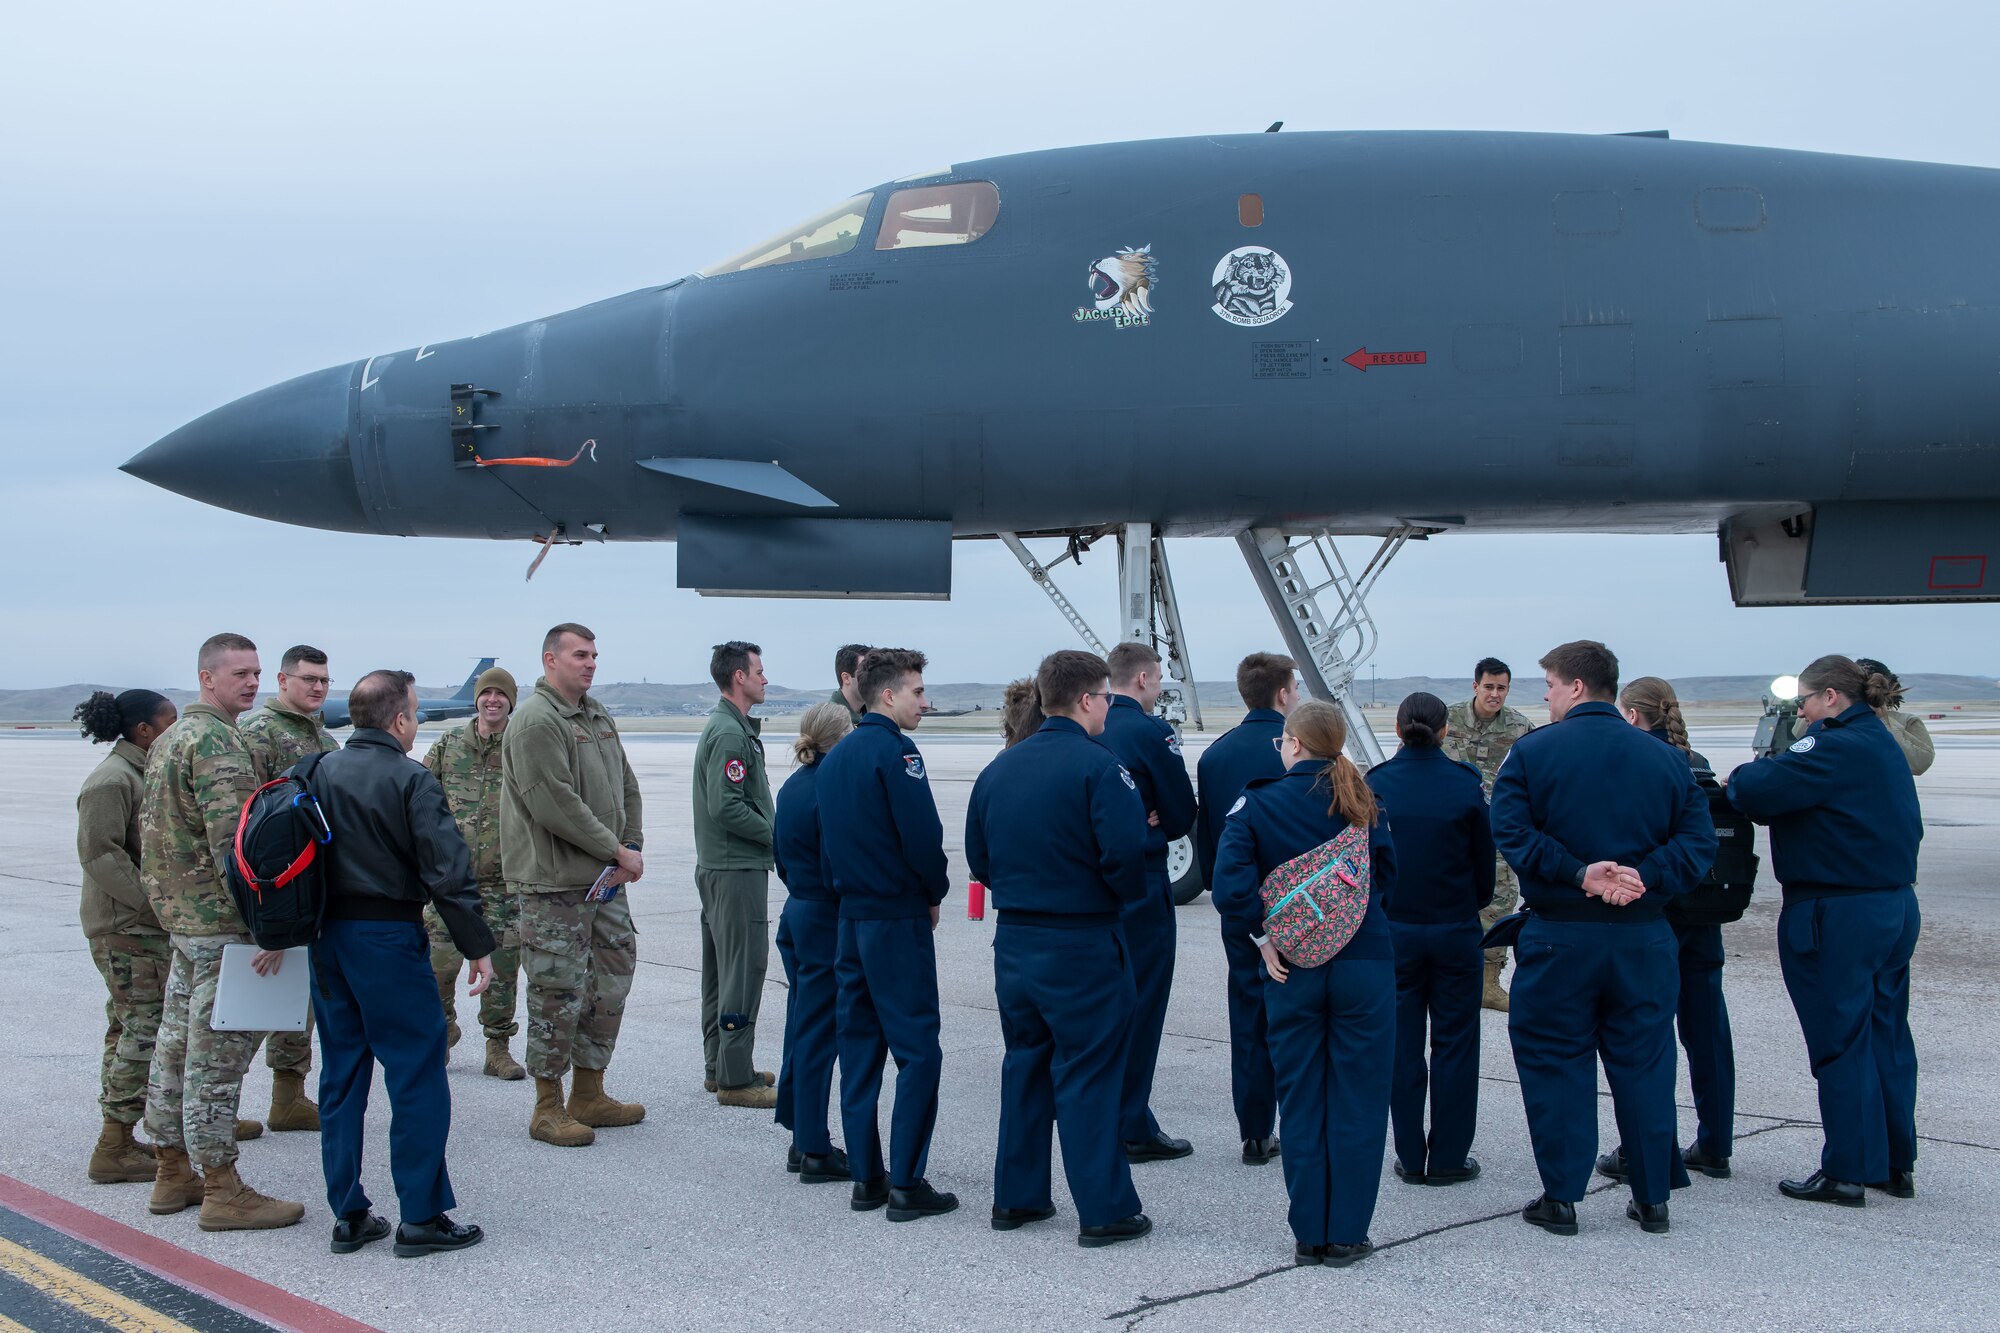 Students with the Douglas High School Air Force Junior Reserve Officer Training Corps visit a static display of a B-1B Lancer on Ellsworth Air Force Base, S.D., April 19, 2022. The pilots of Ellsworth were the first to utilize the Joint Air-to-Surface Standoff missile in a combat scenario. (U.S. Air Force Photo by Airman 1st Class Adam Olson)